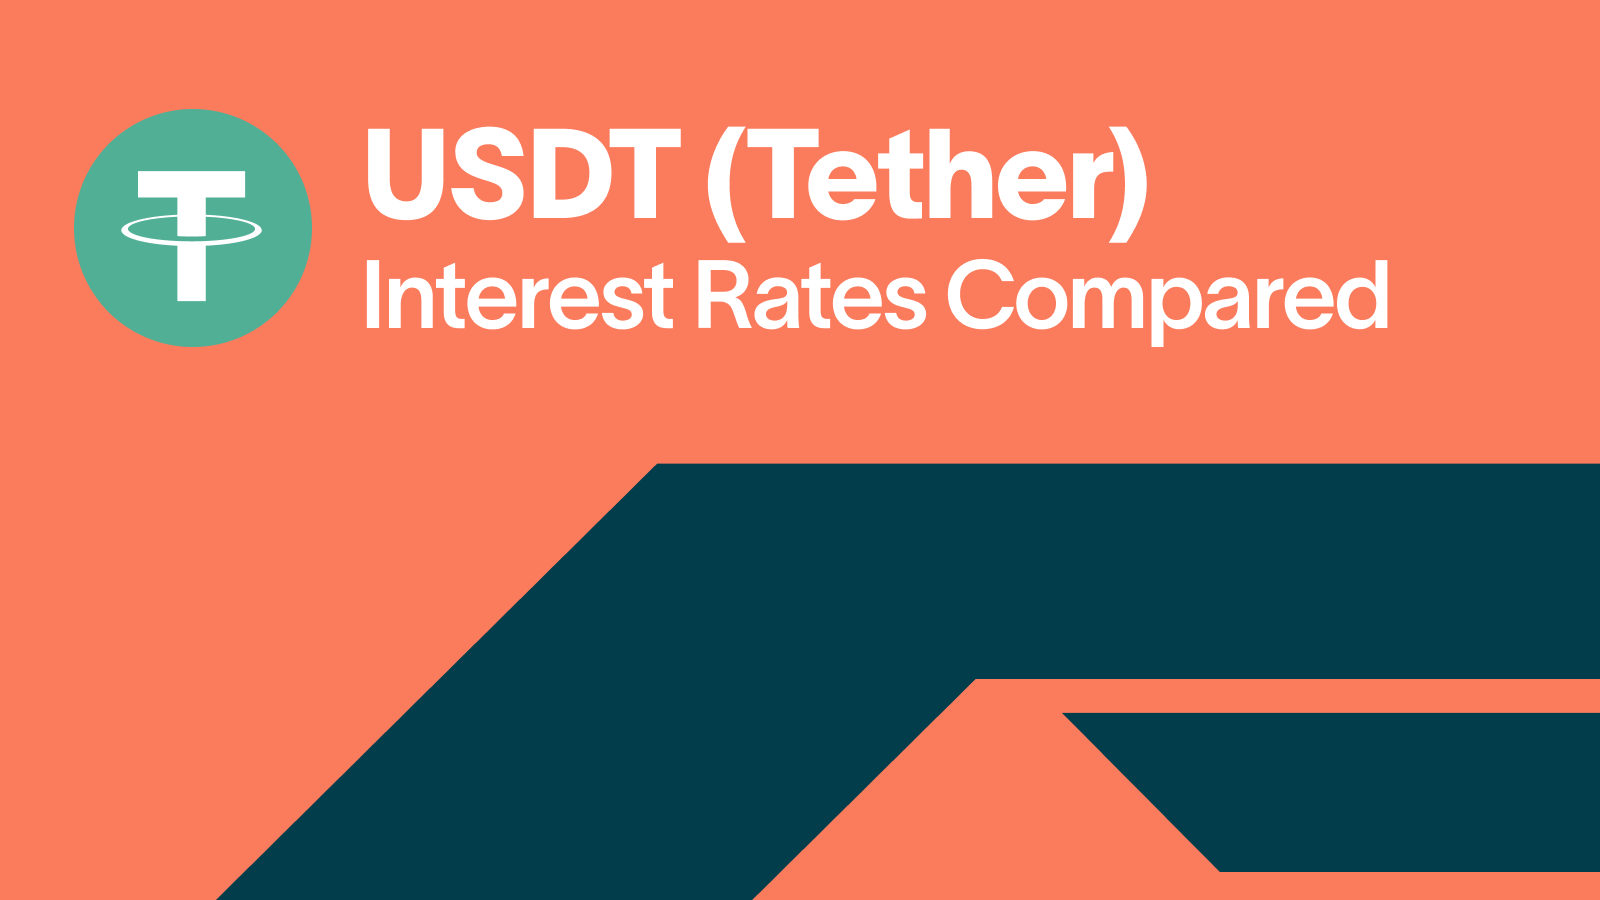 USDT (Tether) Interest Rates Compared